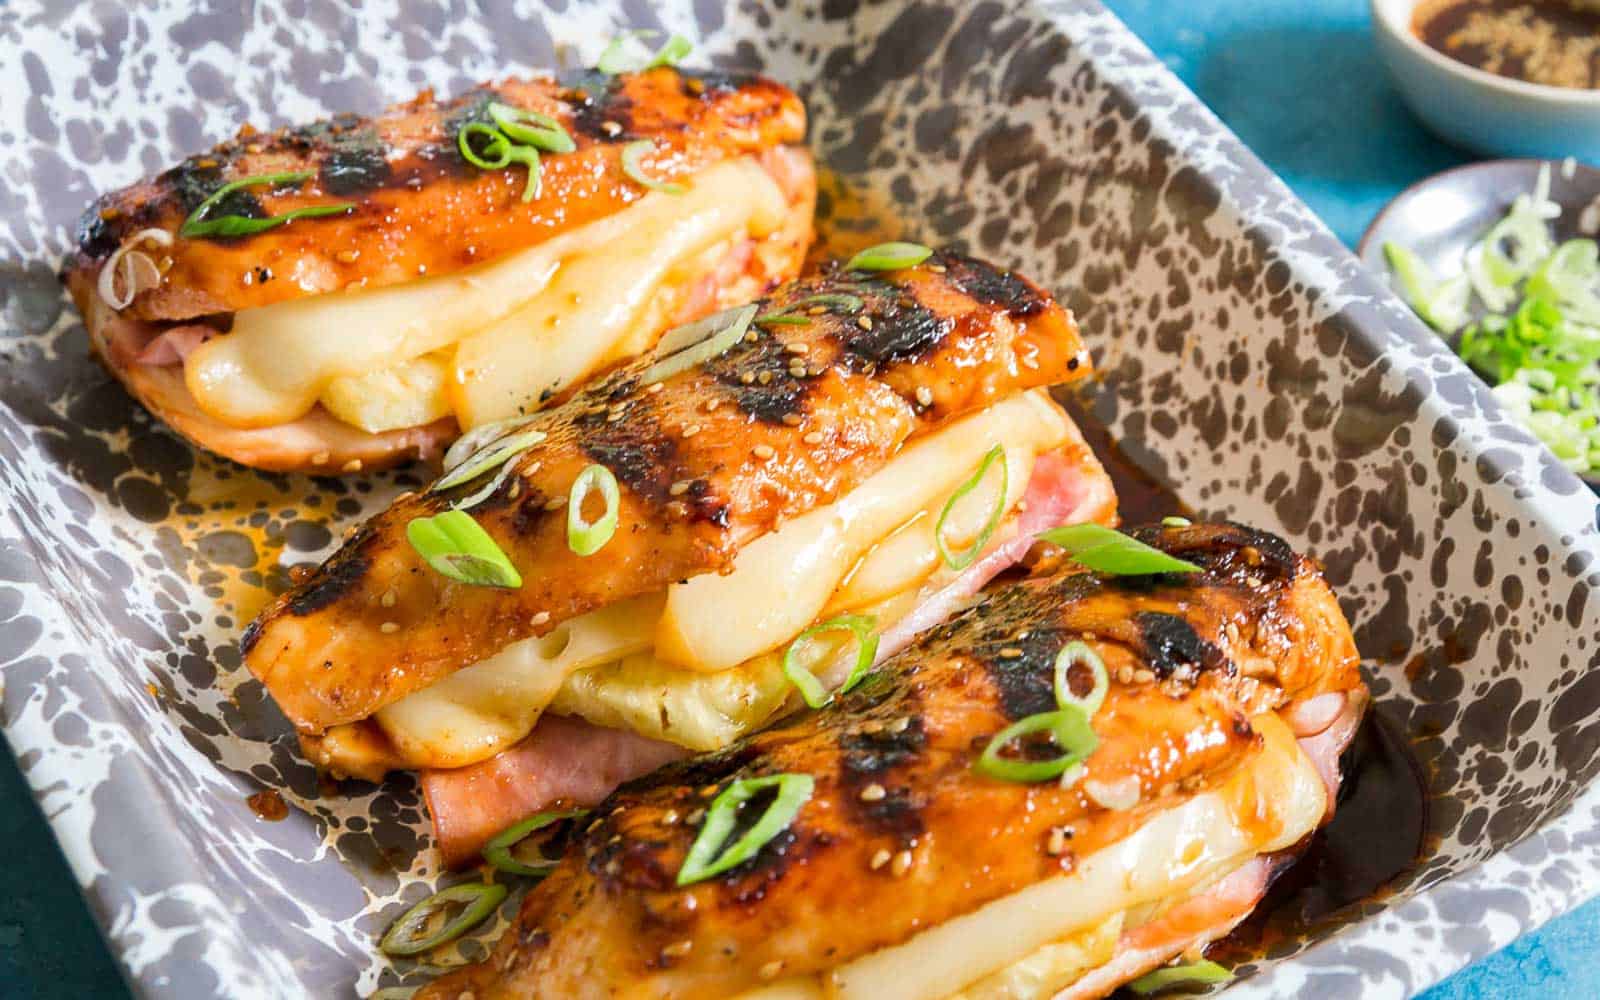 Grilled chicken breasts stuffed with ham, pineapple and Jarlsberg cheese garnished with green onion.